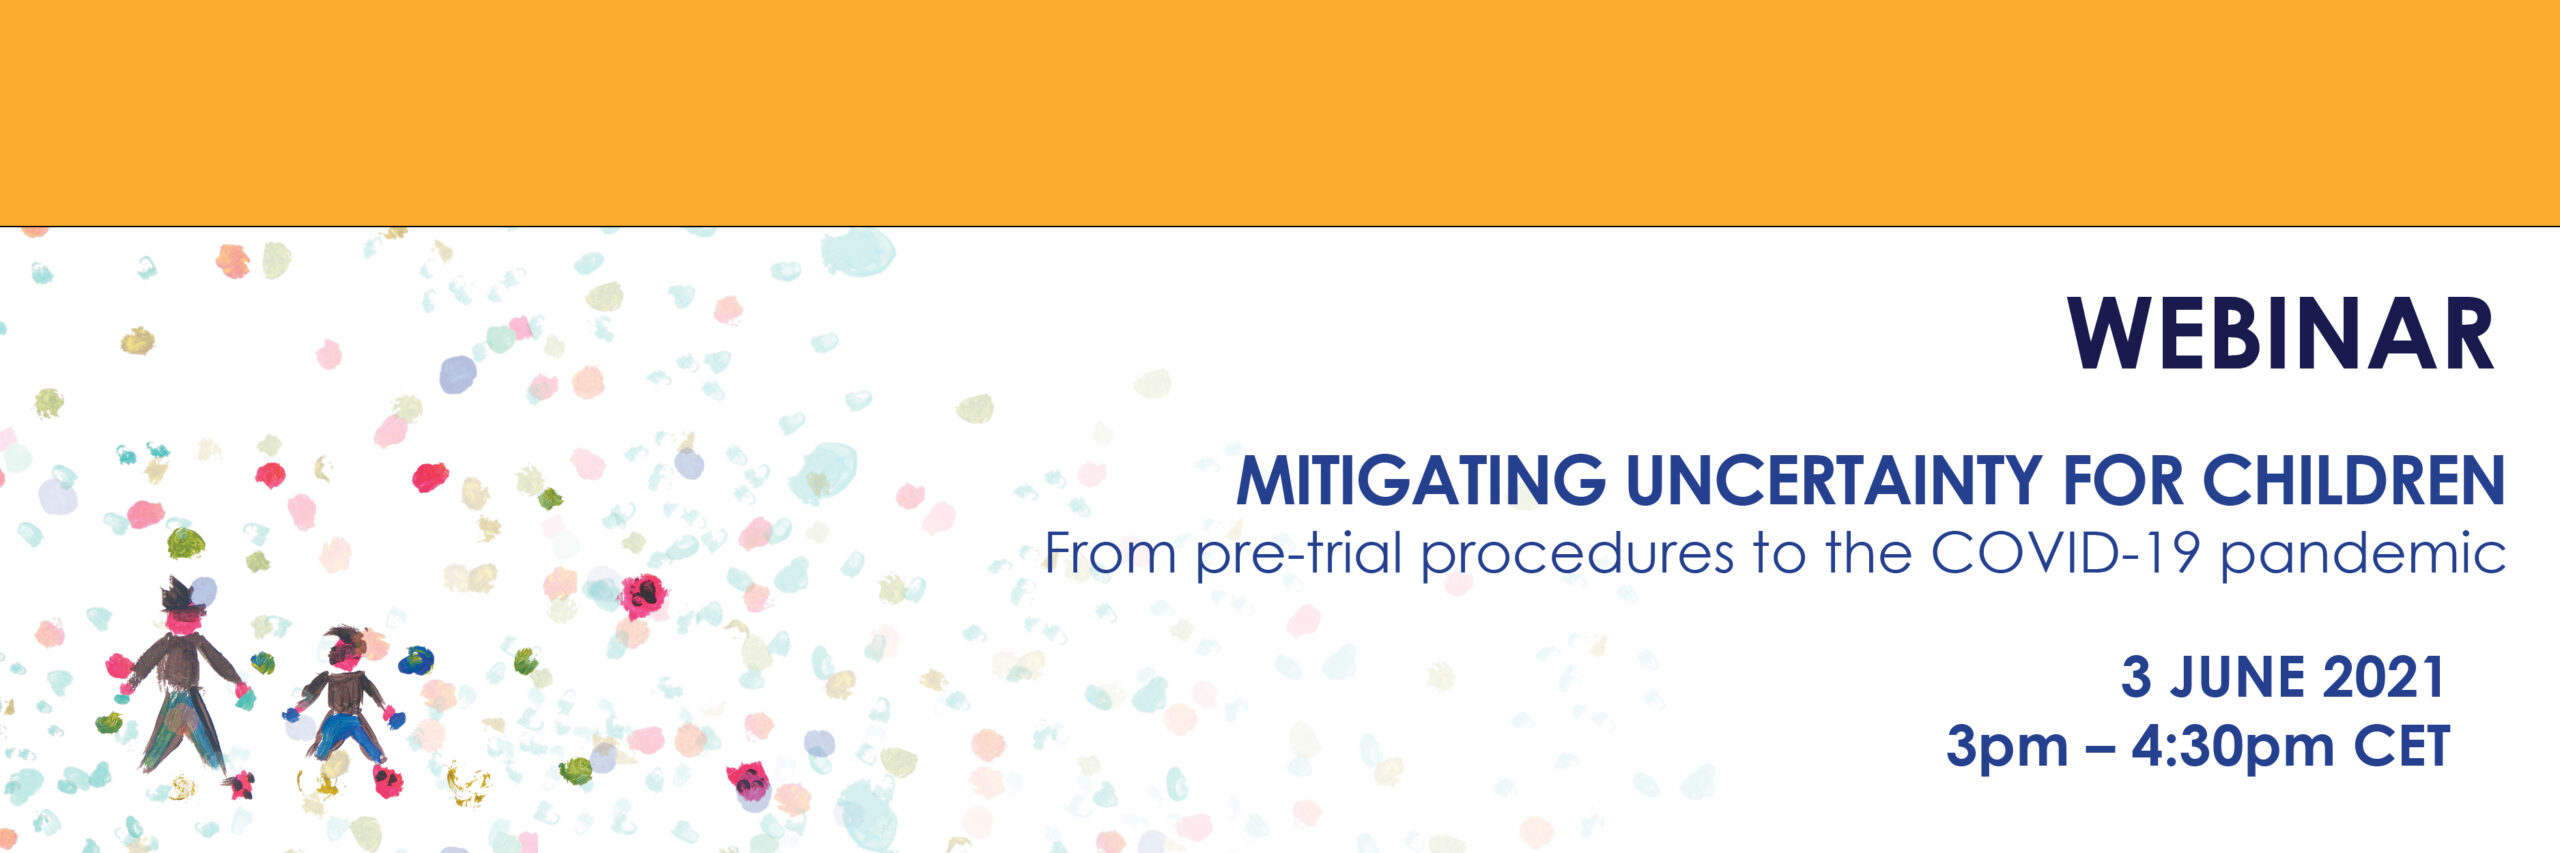 Register now for COPE’s webinar “Mitigating Uncertainty for Children: From pre-trial procedures to the COVID-19 pandemic”